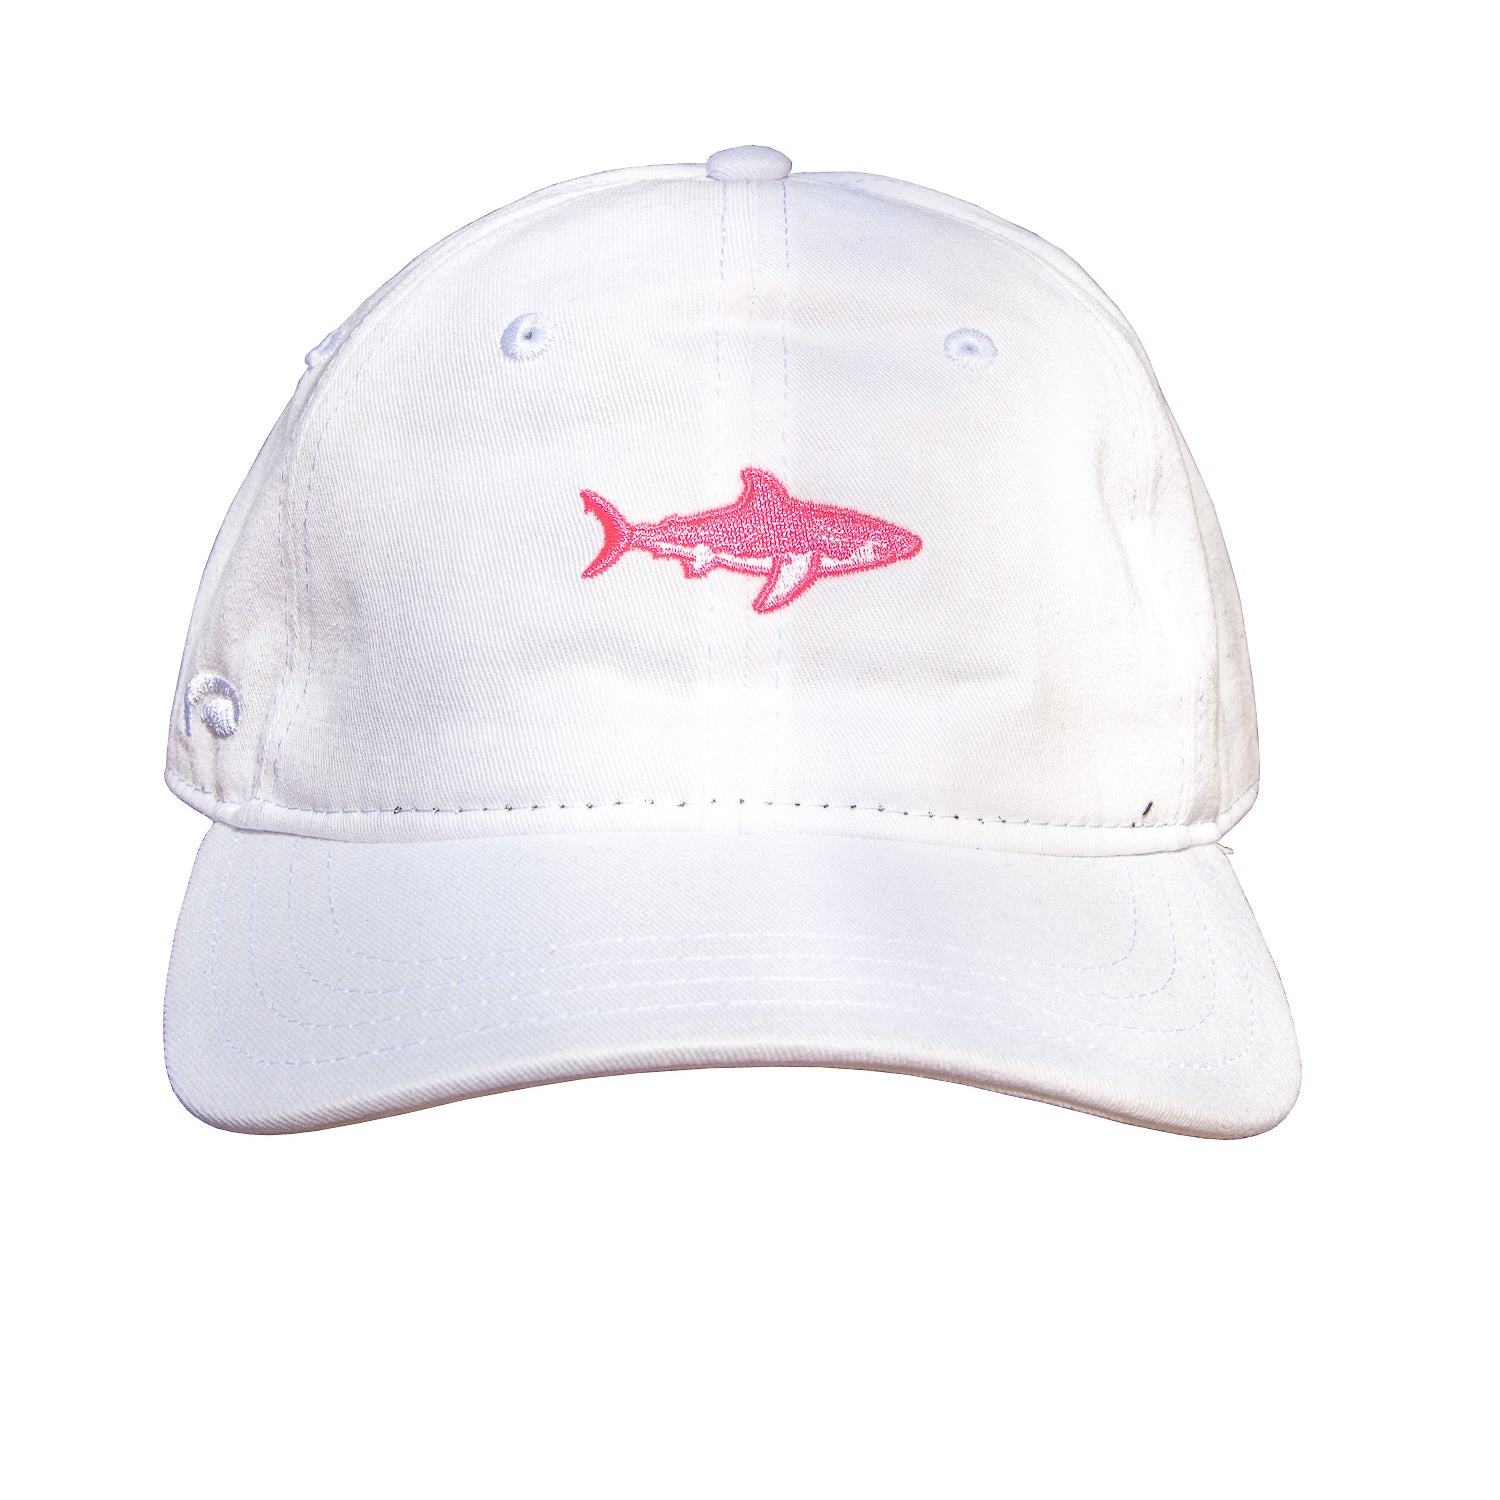 Island Water Sports Low Profile Shark Hat White/Pink OS